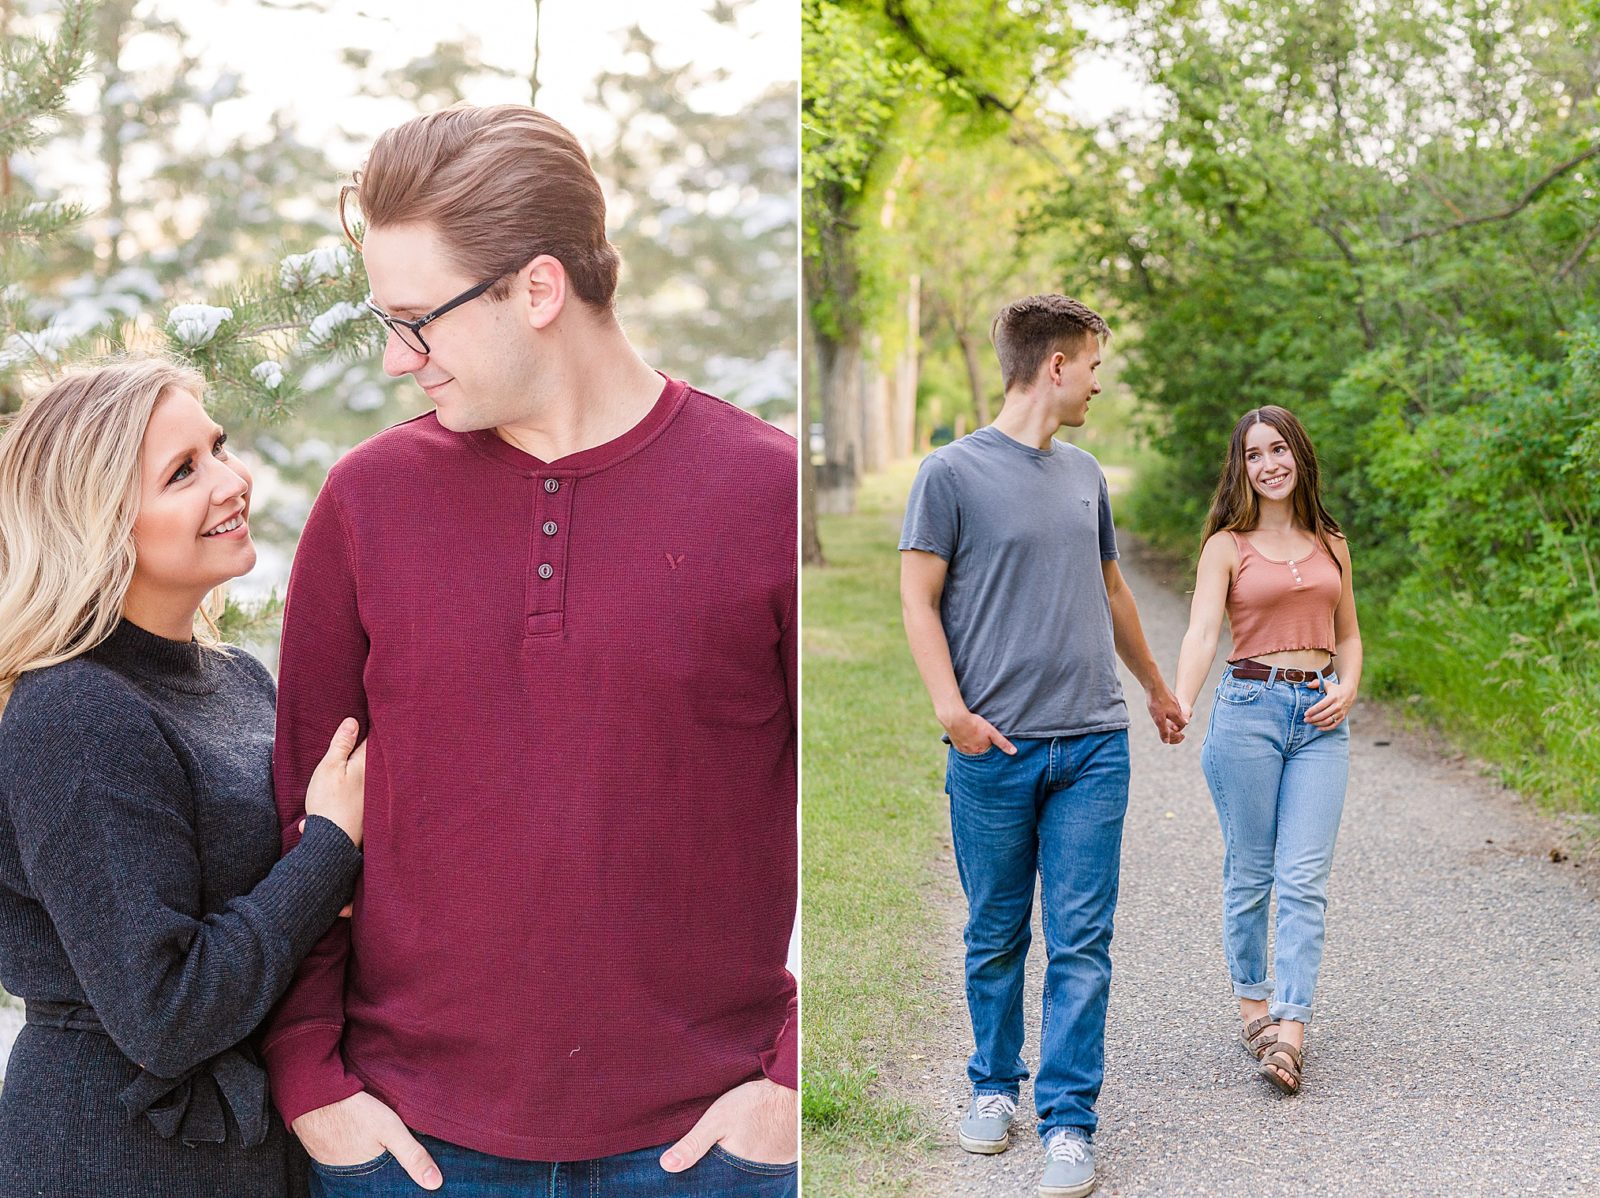 what to wear for couples photos - keep it simple with simple clothes